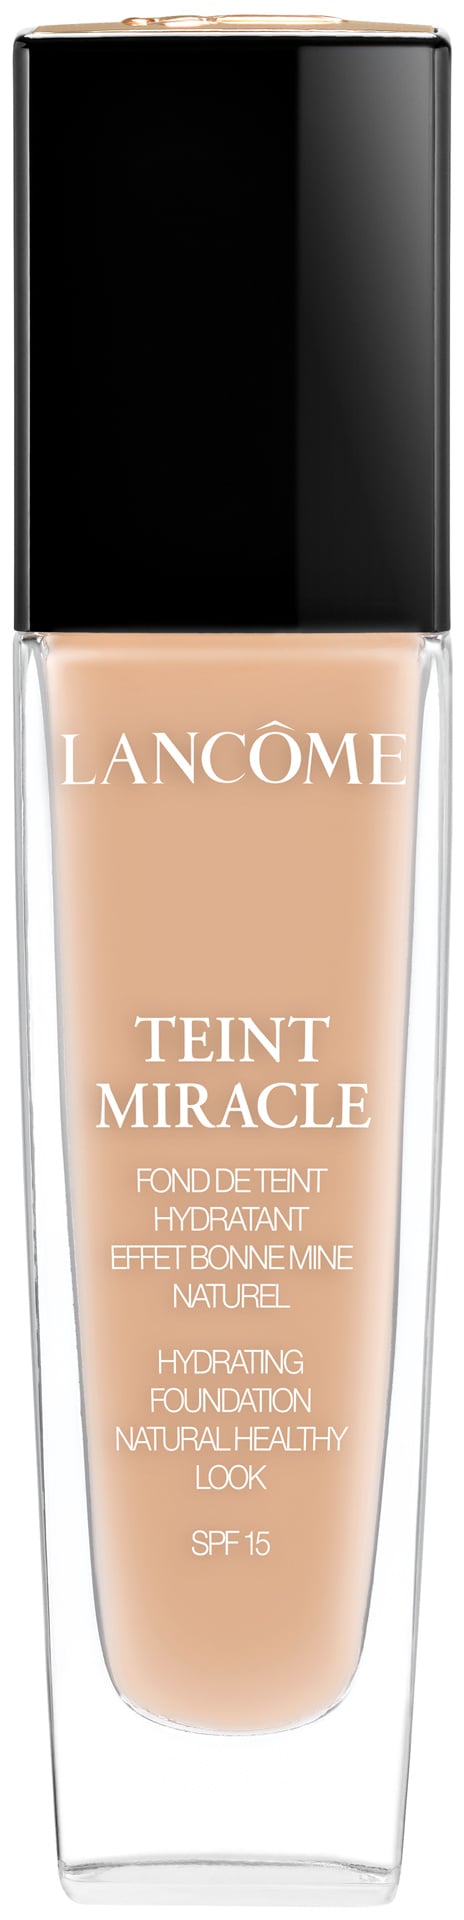 Teint Miracle Foundation